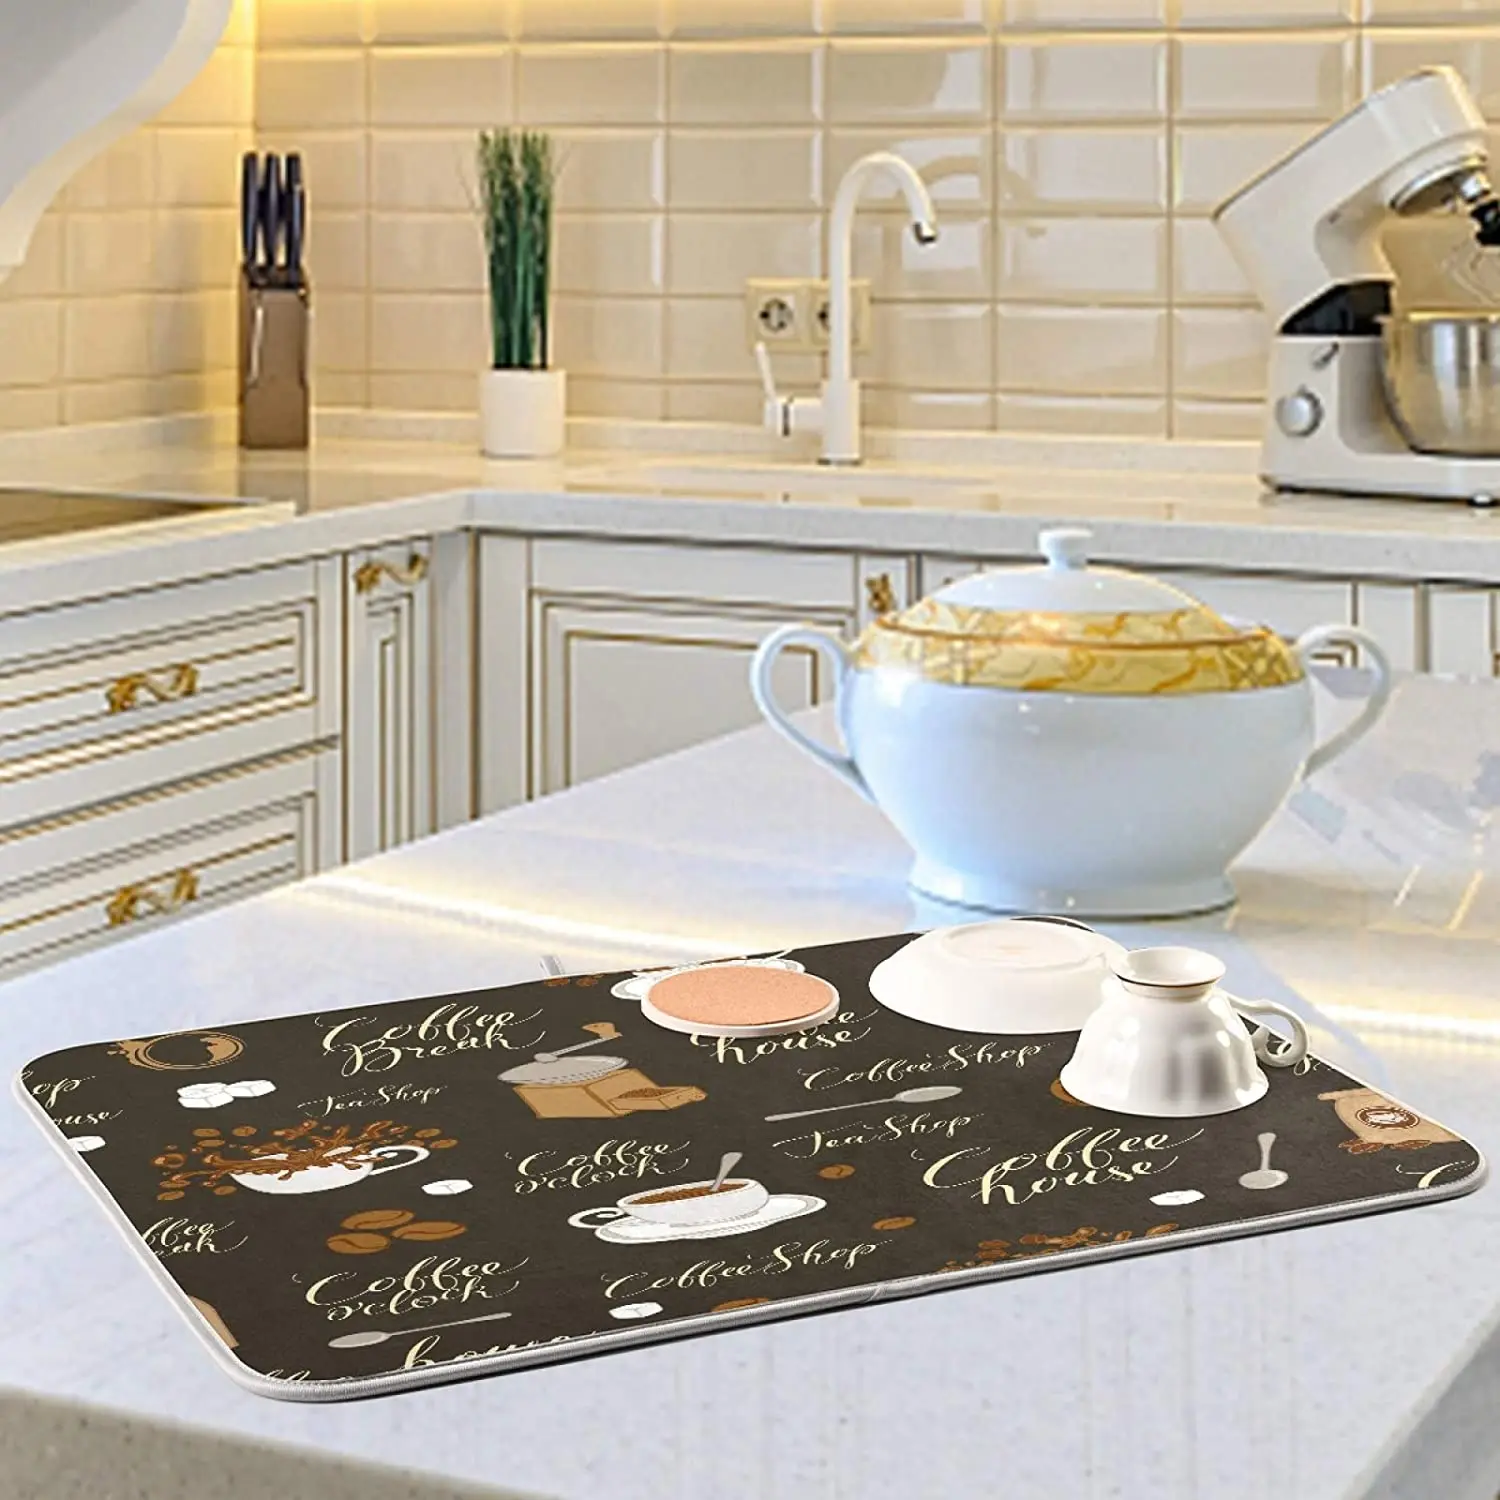 https://ae01.alicdn.com/kf/Sfc5dd220485340f4a4de75a58d5edc58i/Coffee-Beans-Dish-Drying-Mat-for-Kitchen-Counter-18x24-Inch-Absorbent-Microfiber-Dry-Dishes-Mats-Drainer.jpg